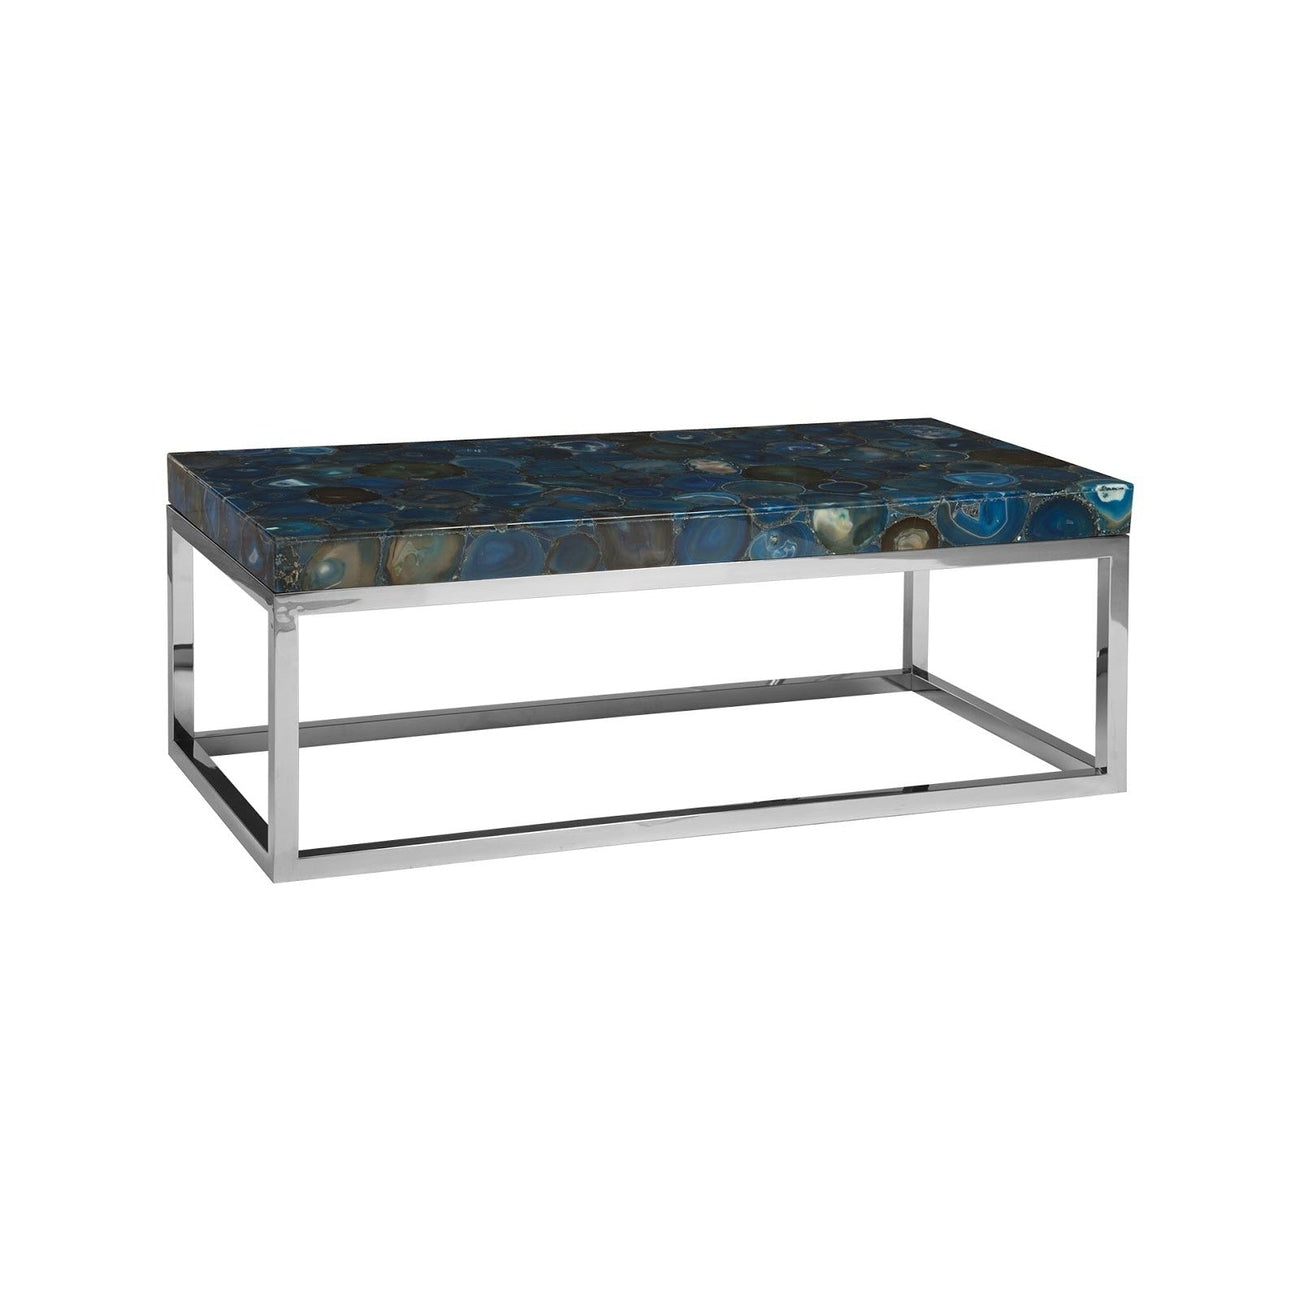 Phillips Collection, Agate Coffee Table - Stainless Steel Base